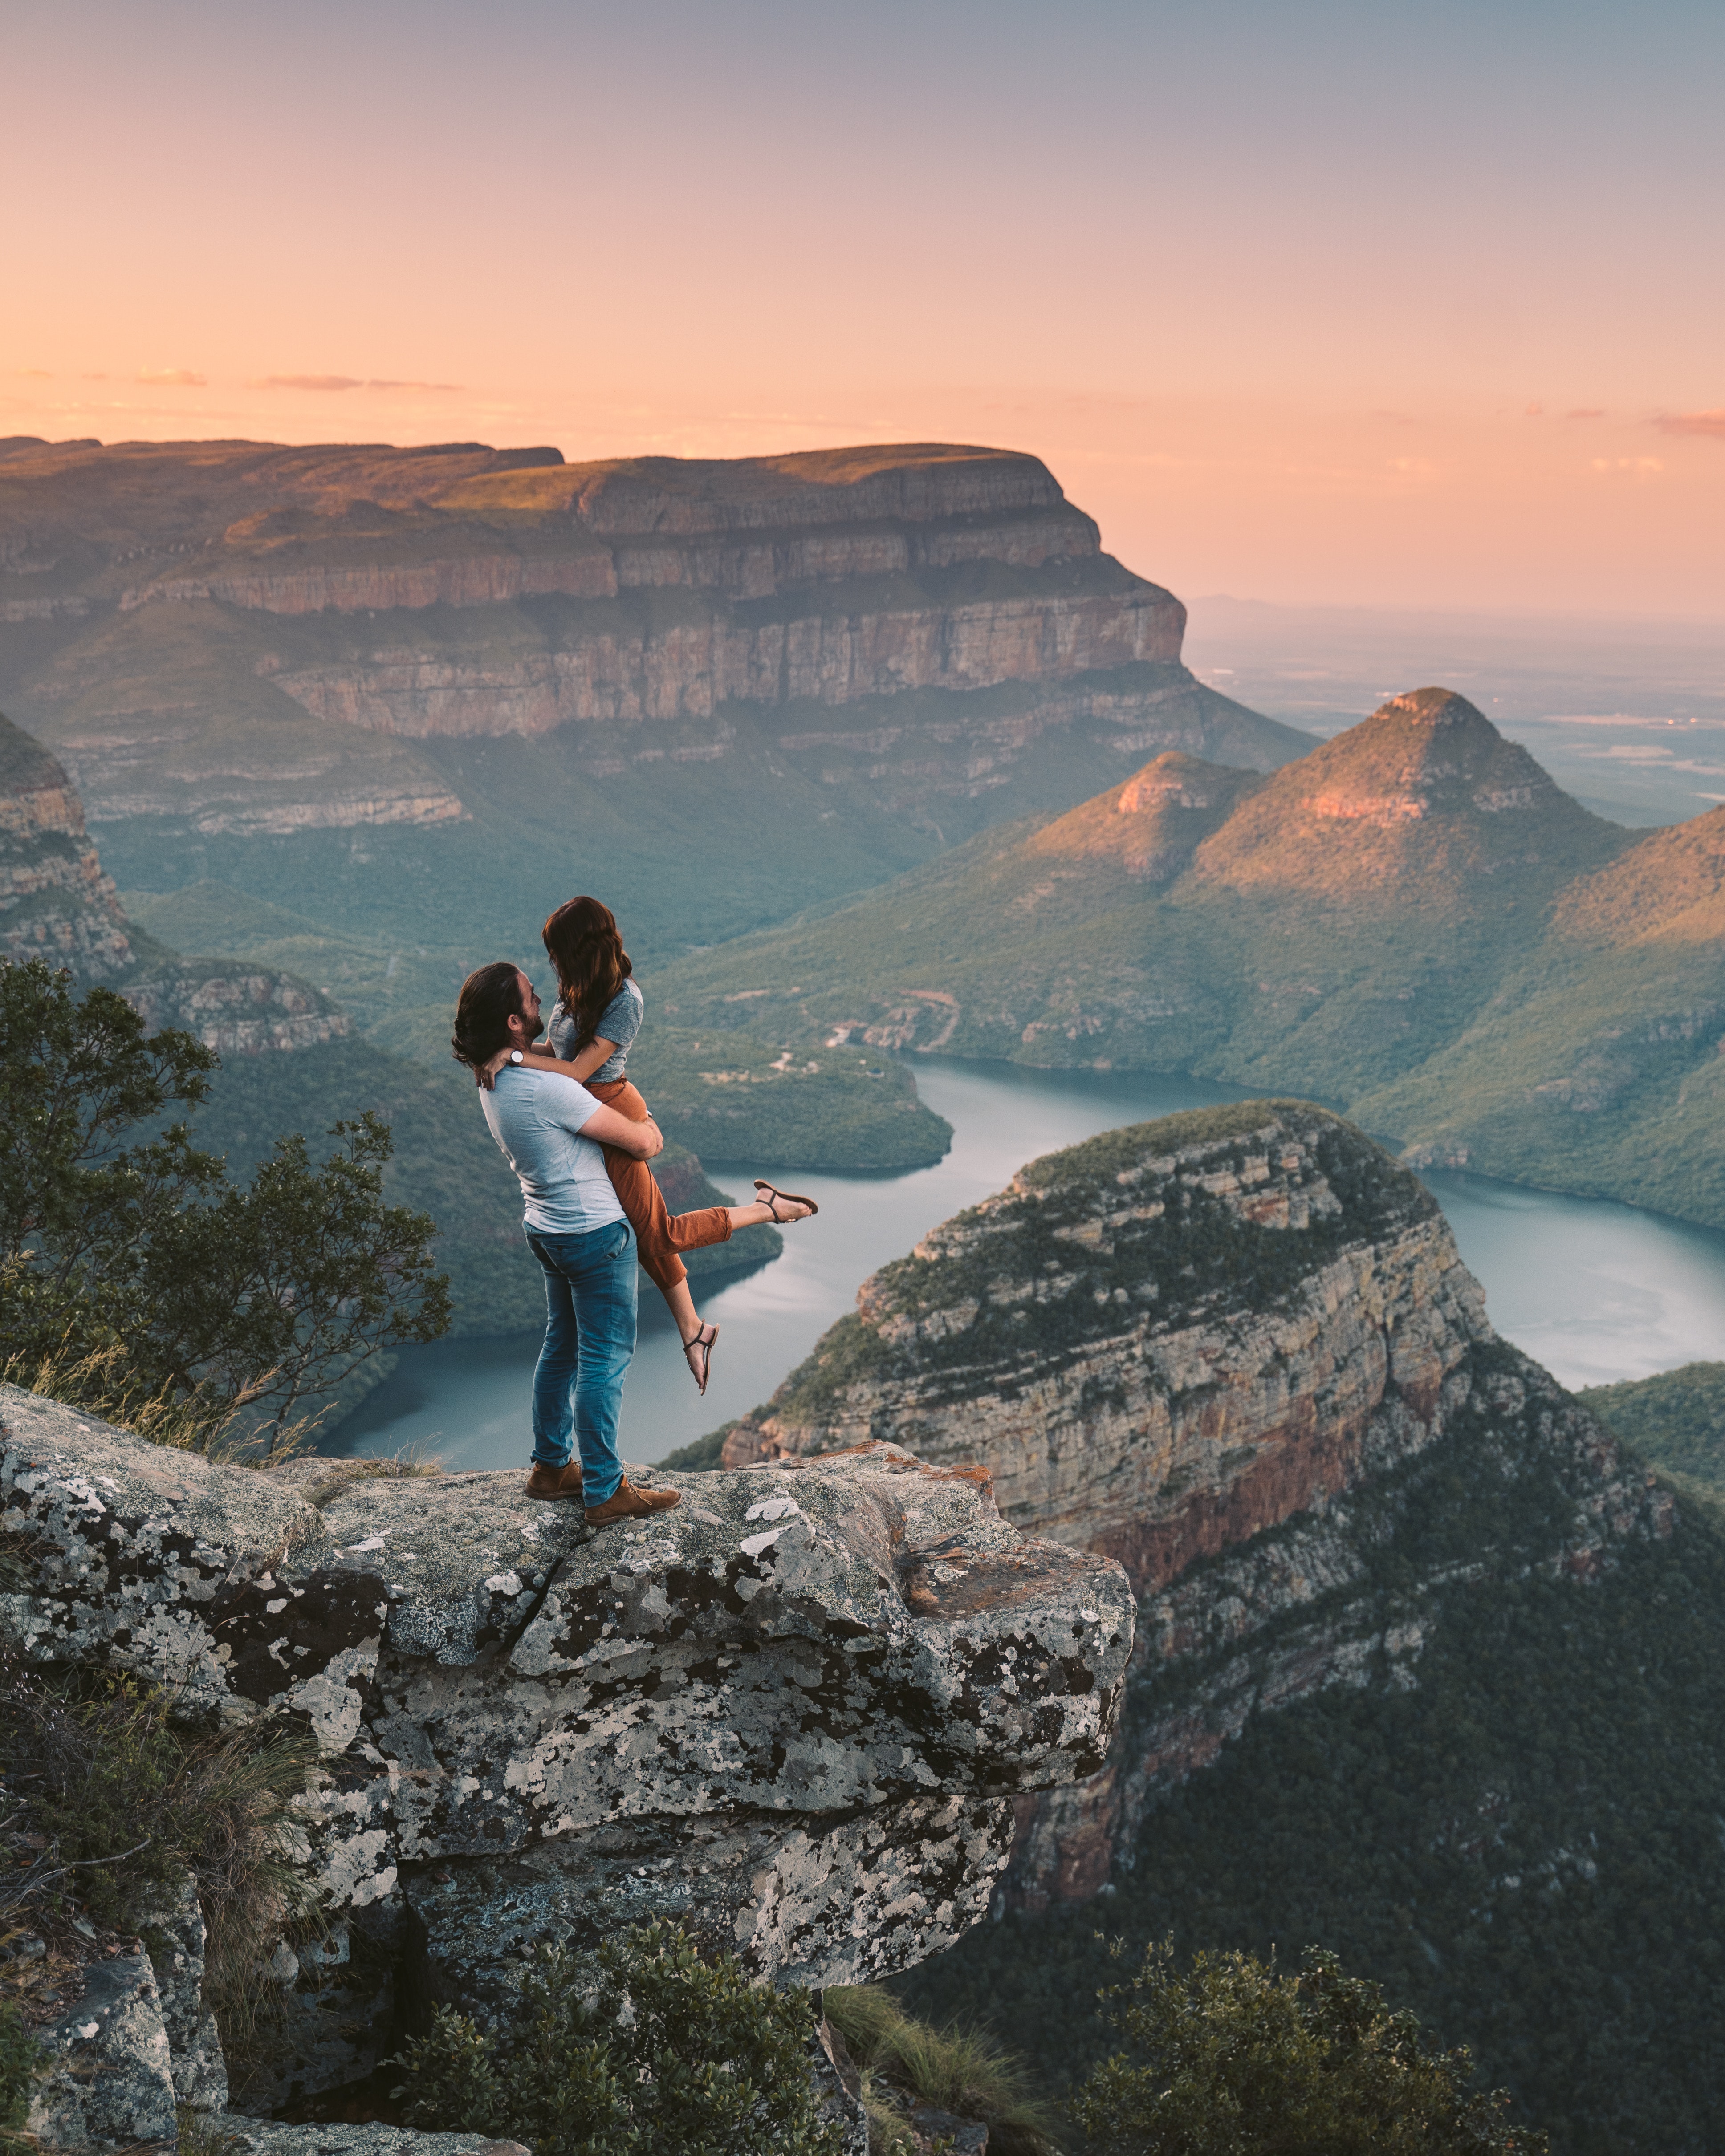 A couple enjoys a sweet moment on top of a mountain. | Source: Pexels